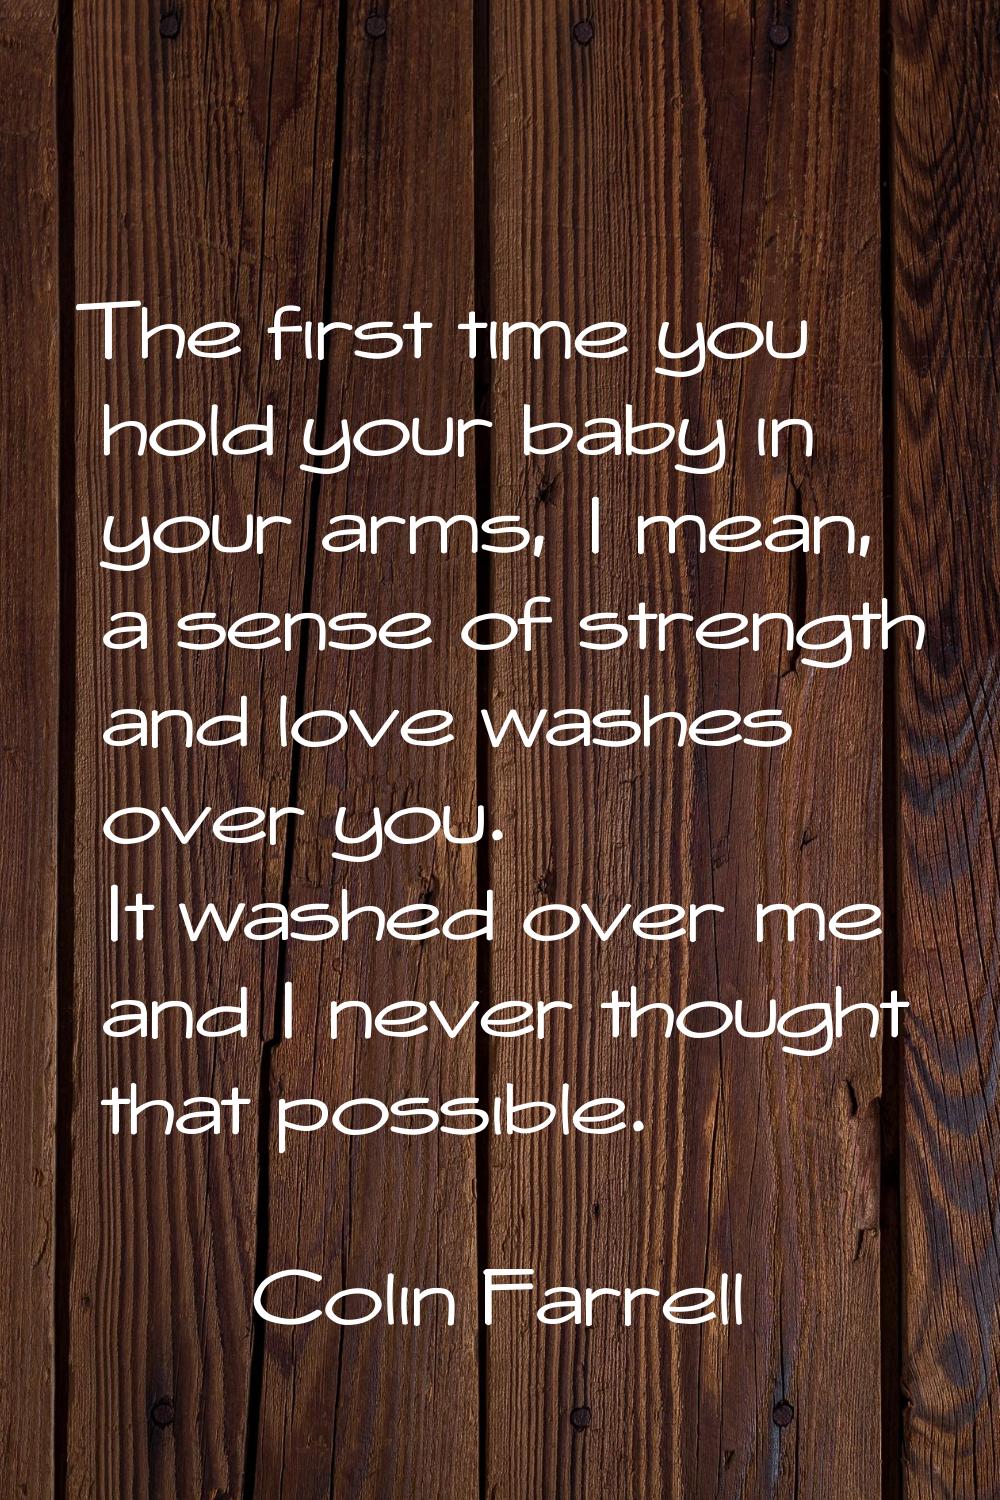 The first time you hold your baby in your arms, I mean, a sense of strength and love washes over yo